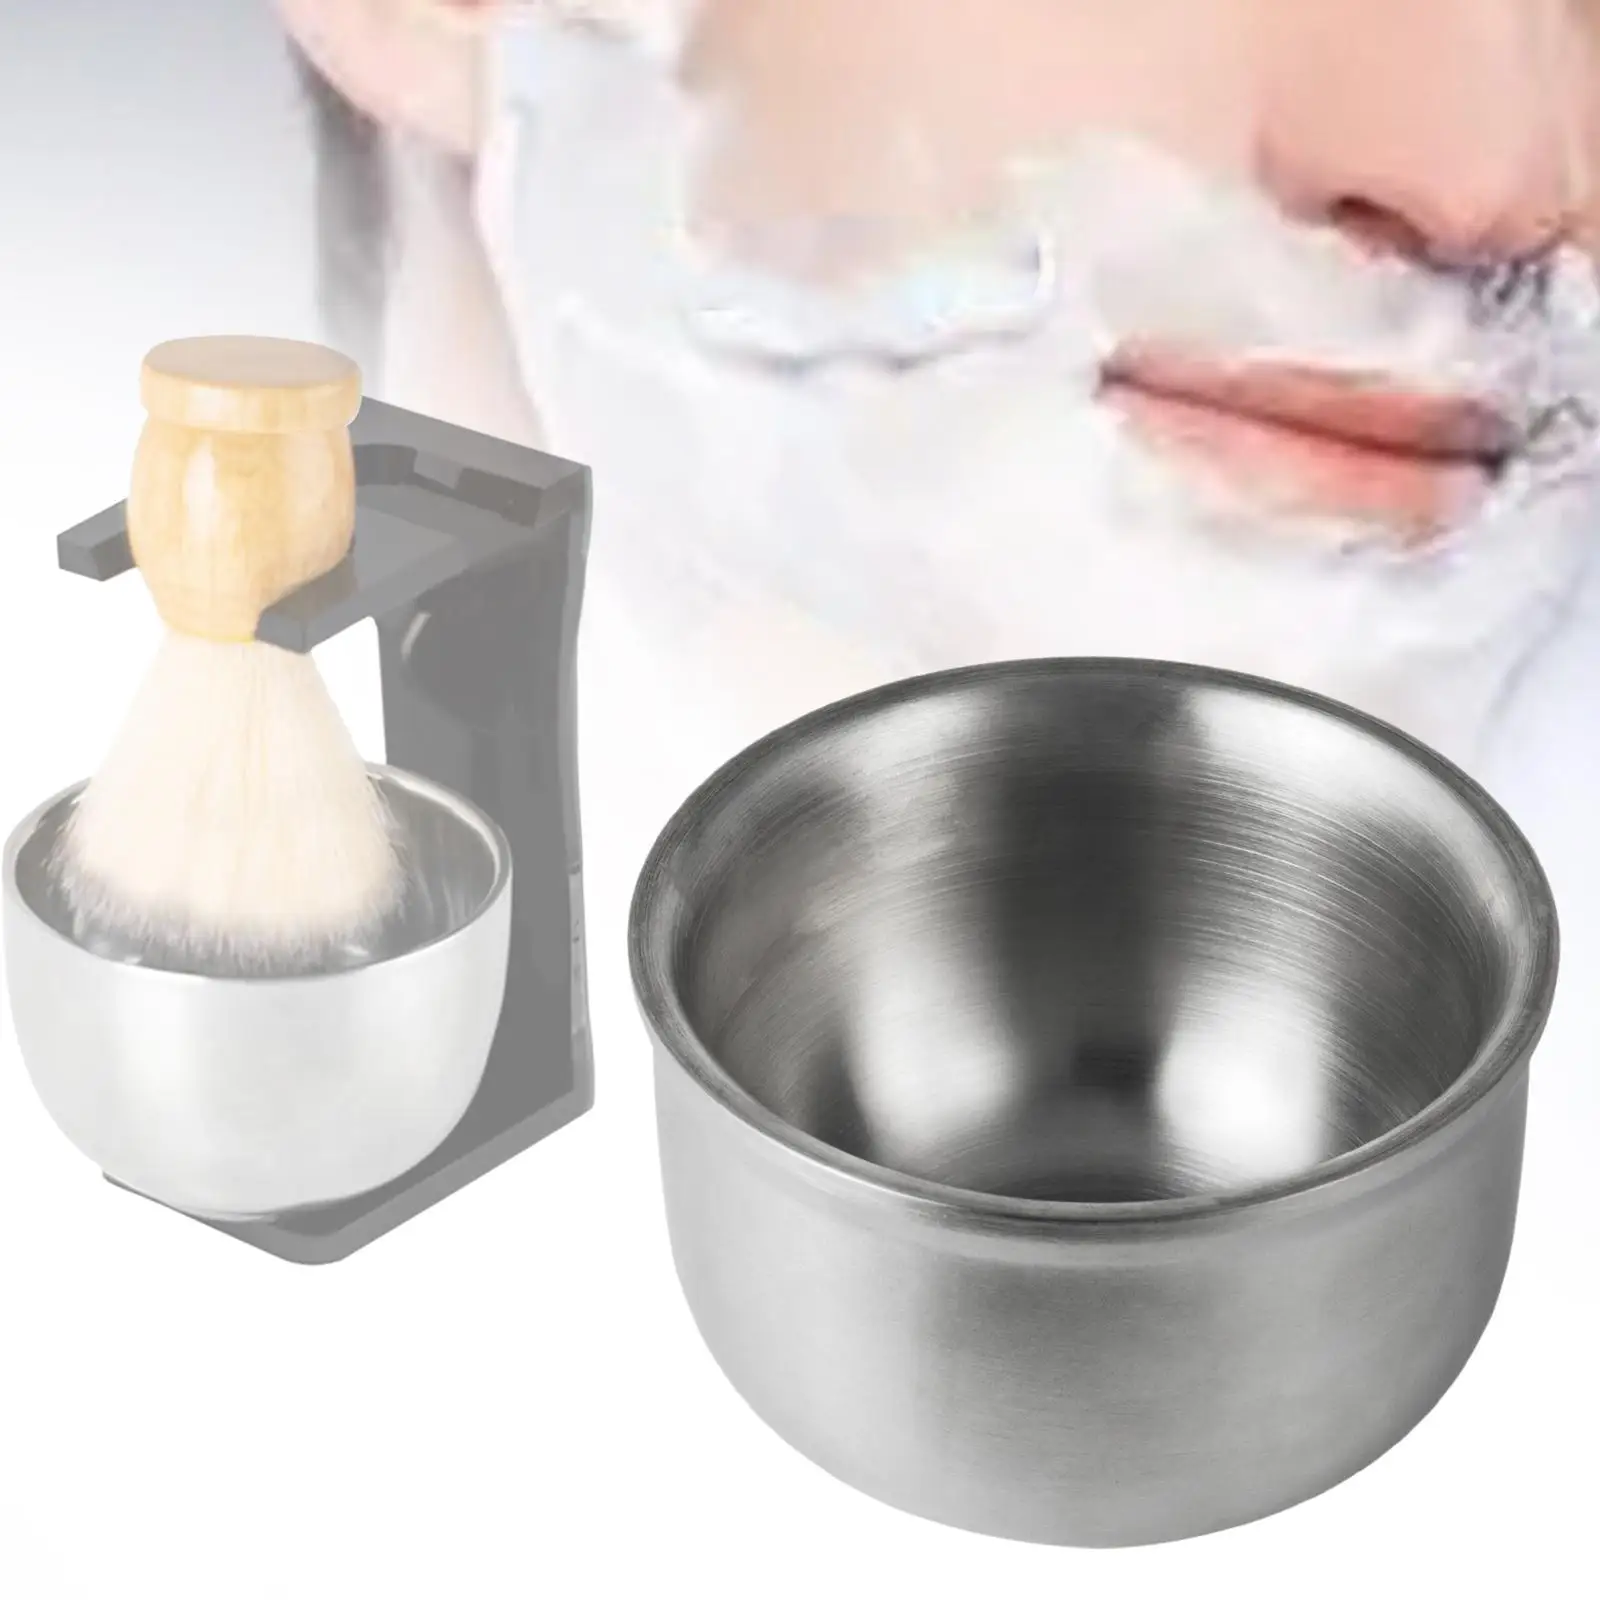 Shaving Soap Bowl Fits Wet Shaving Easy to Lather Smooth Keep Warm Better Heat Insulation Shave Cream and Soap Bowl for Men Gift